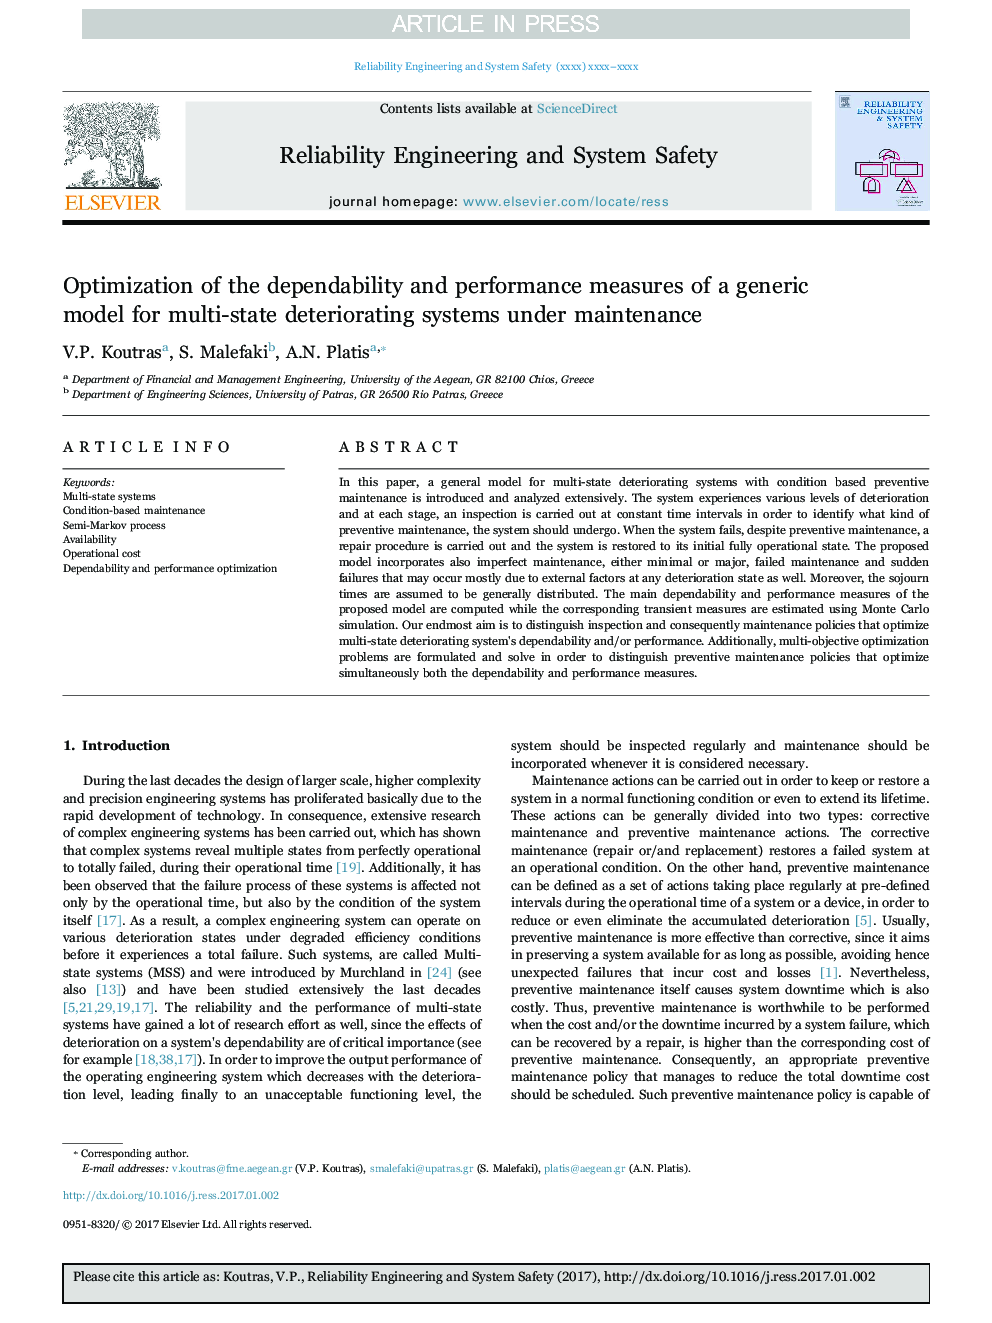 Optimization of the dependability and performance measures of a generic model for multi-state deteriorating systems under maintenance